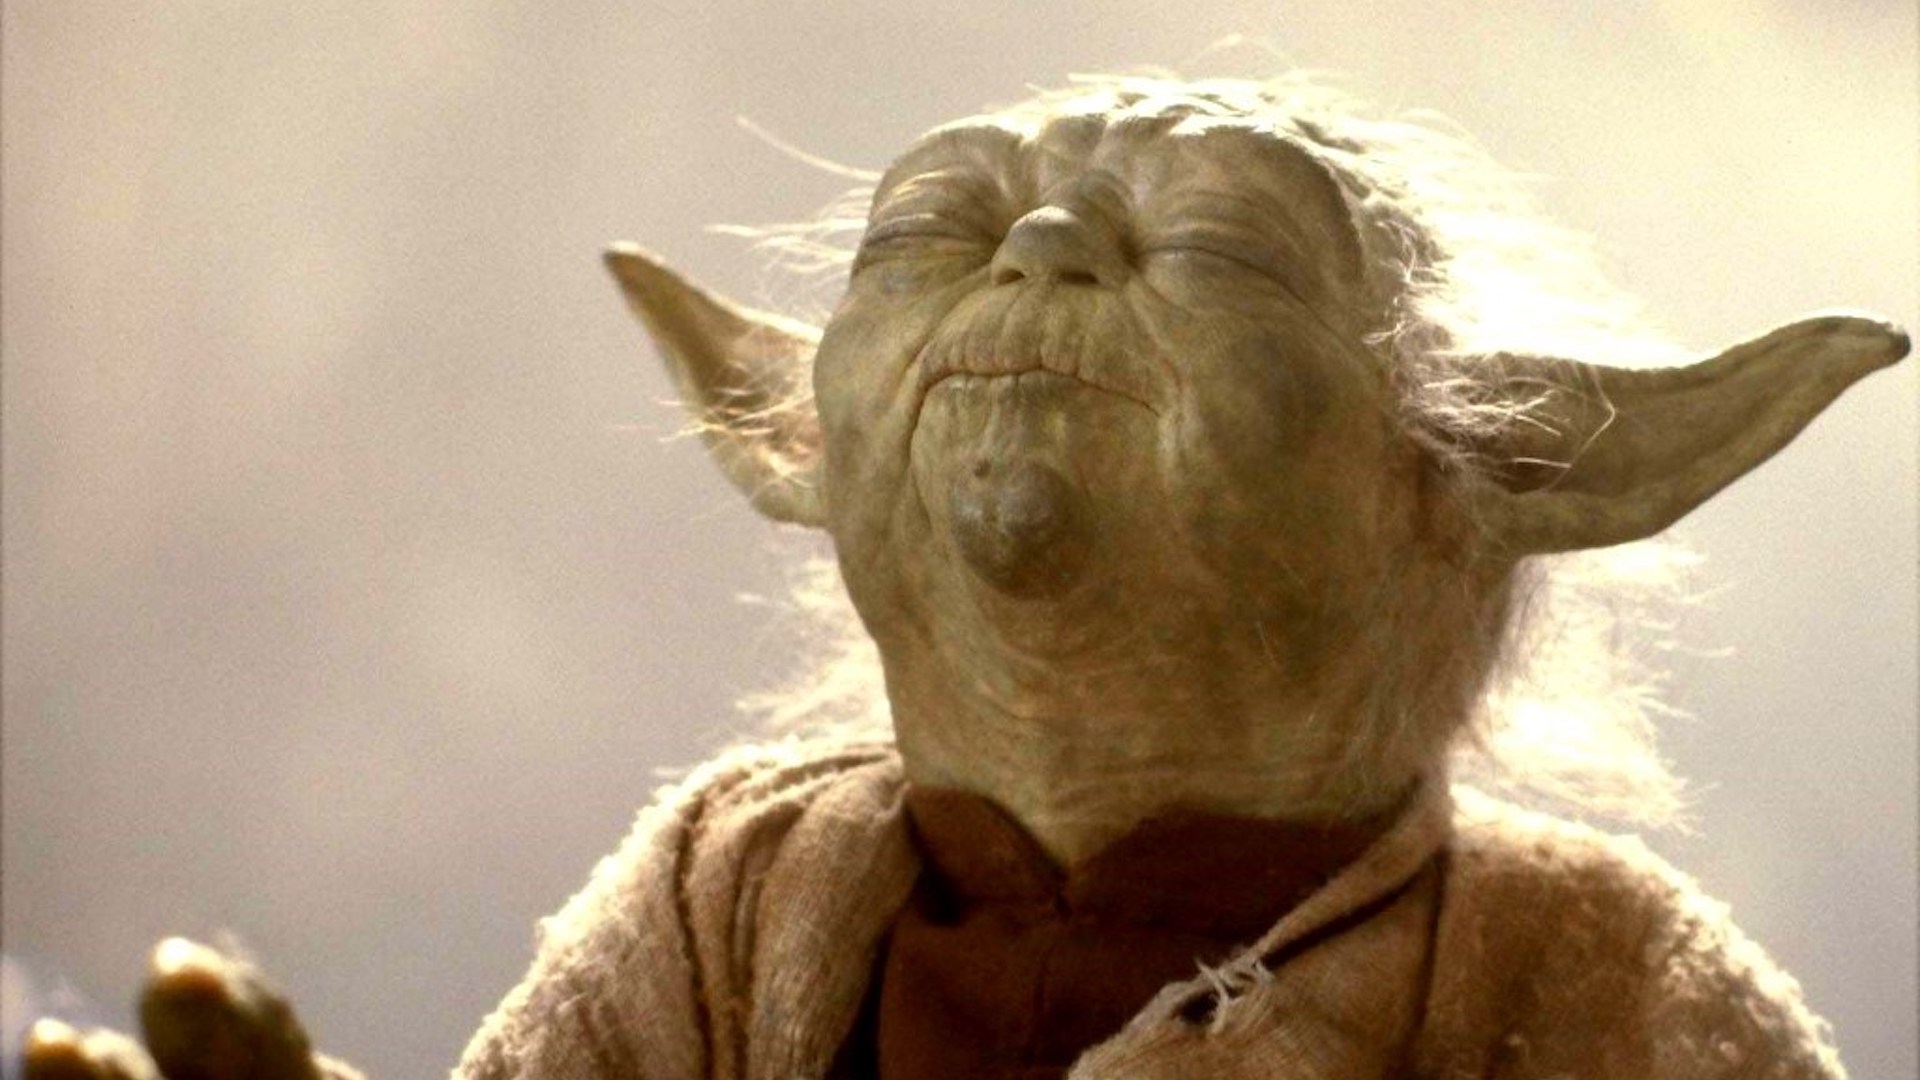 Yoda smelling something delicious, like a space biscuit